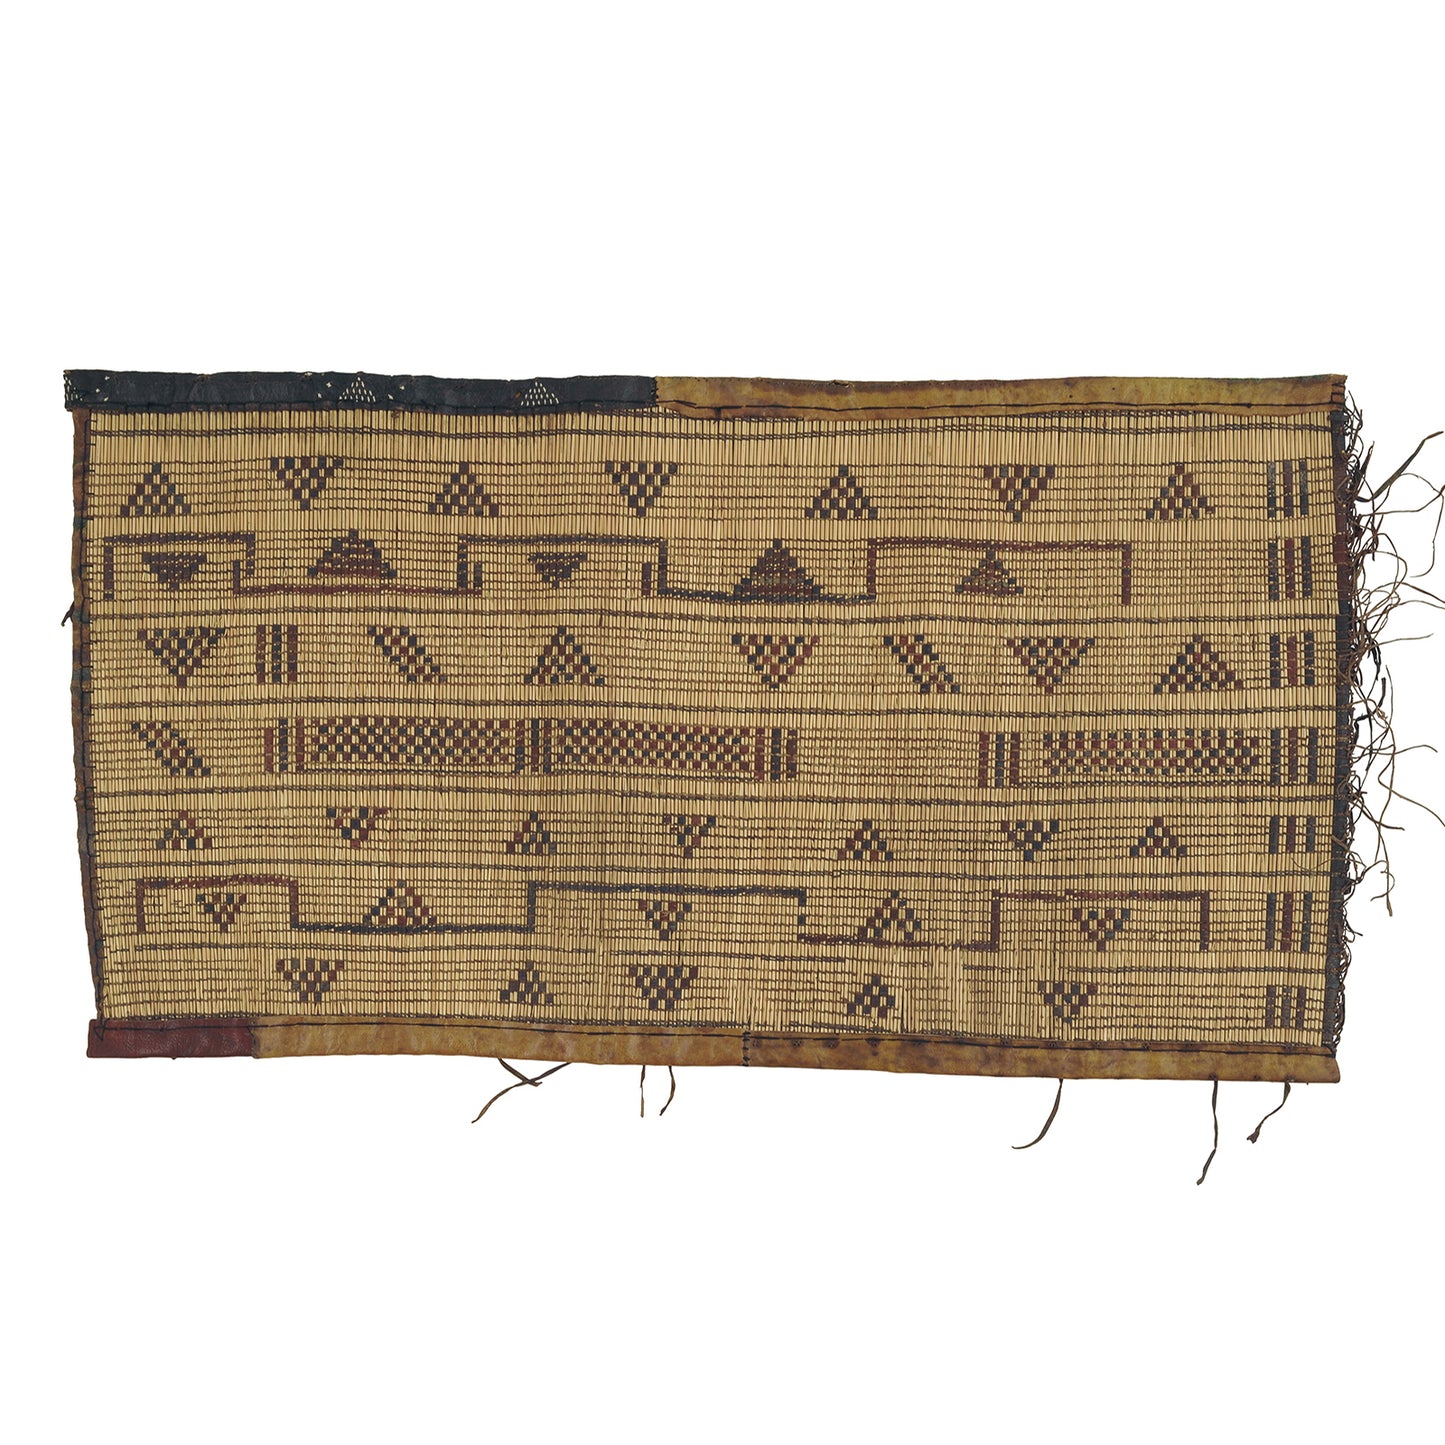 Authentic Tuareg Straw Mat from Niger - A Piece of African Saharan Heritage